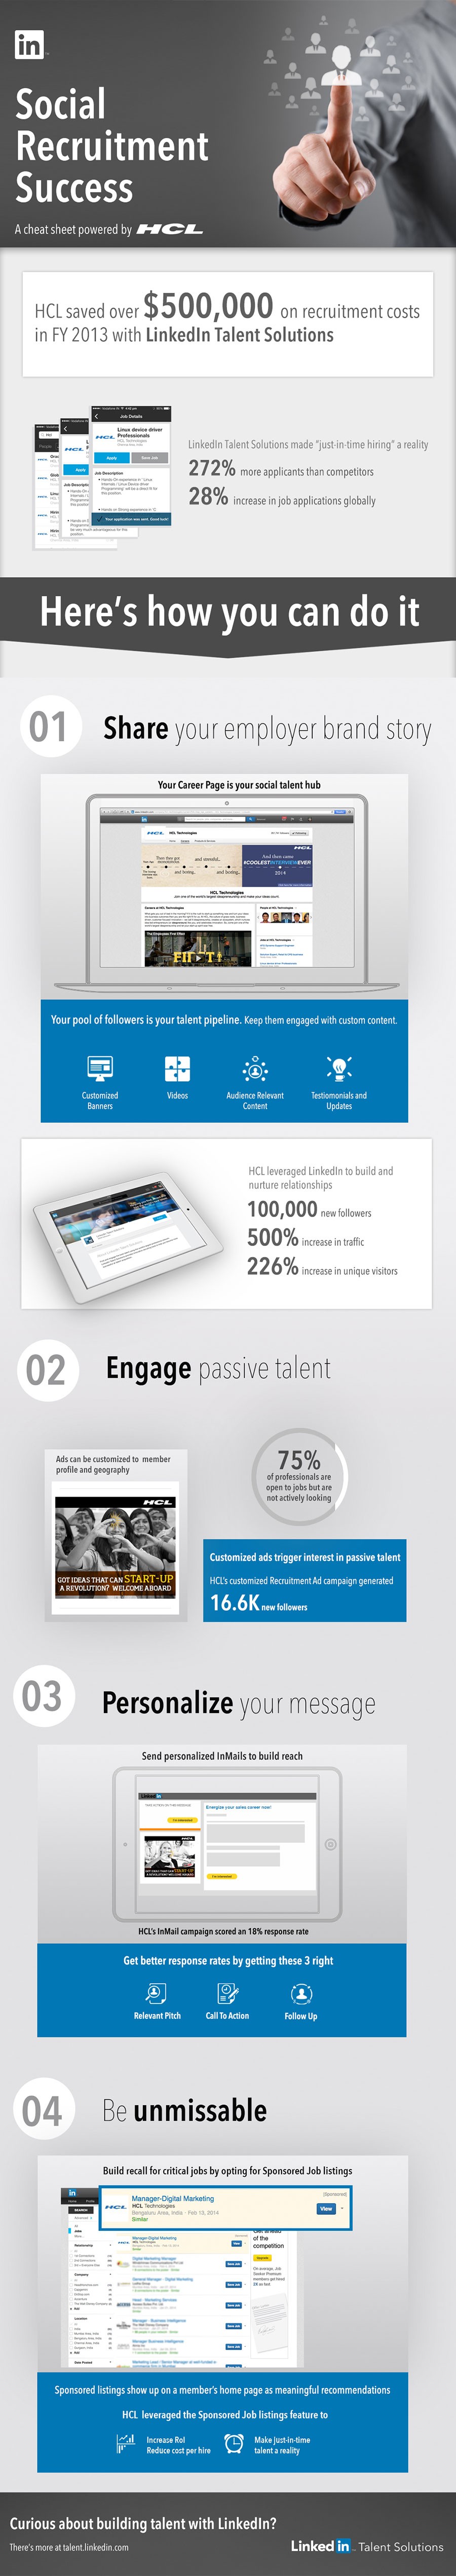 Social Recruiting Infographic